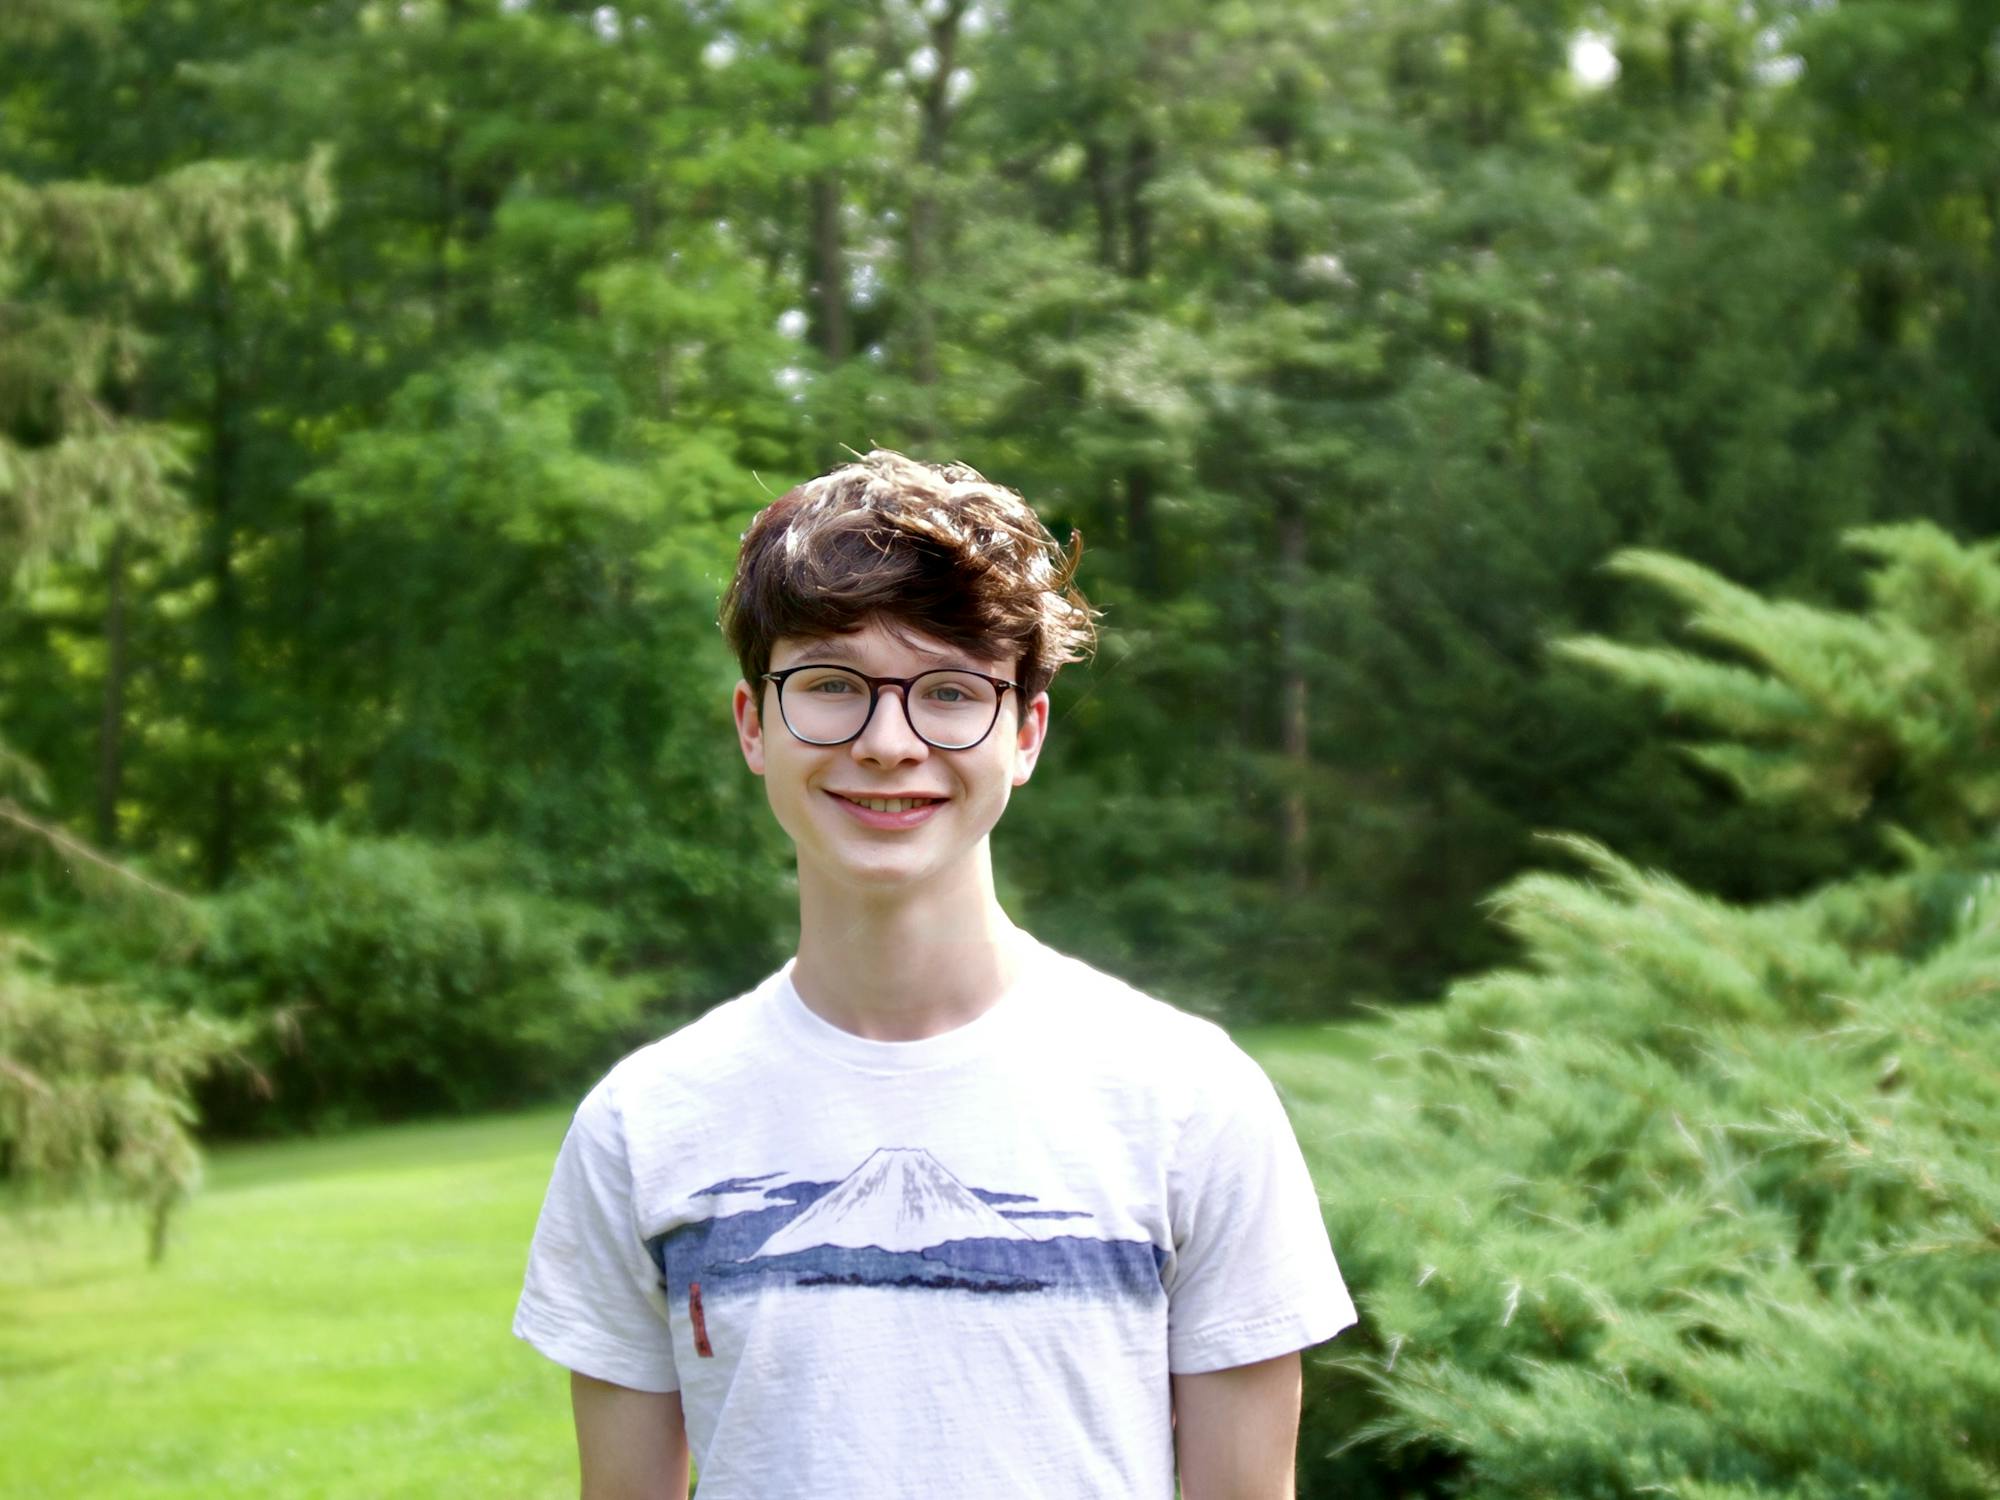 A young man poses outside, smiling before a verdant, forested background.